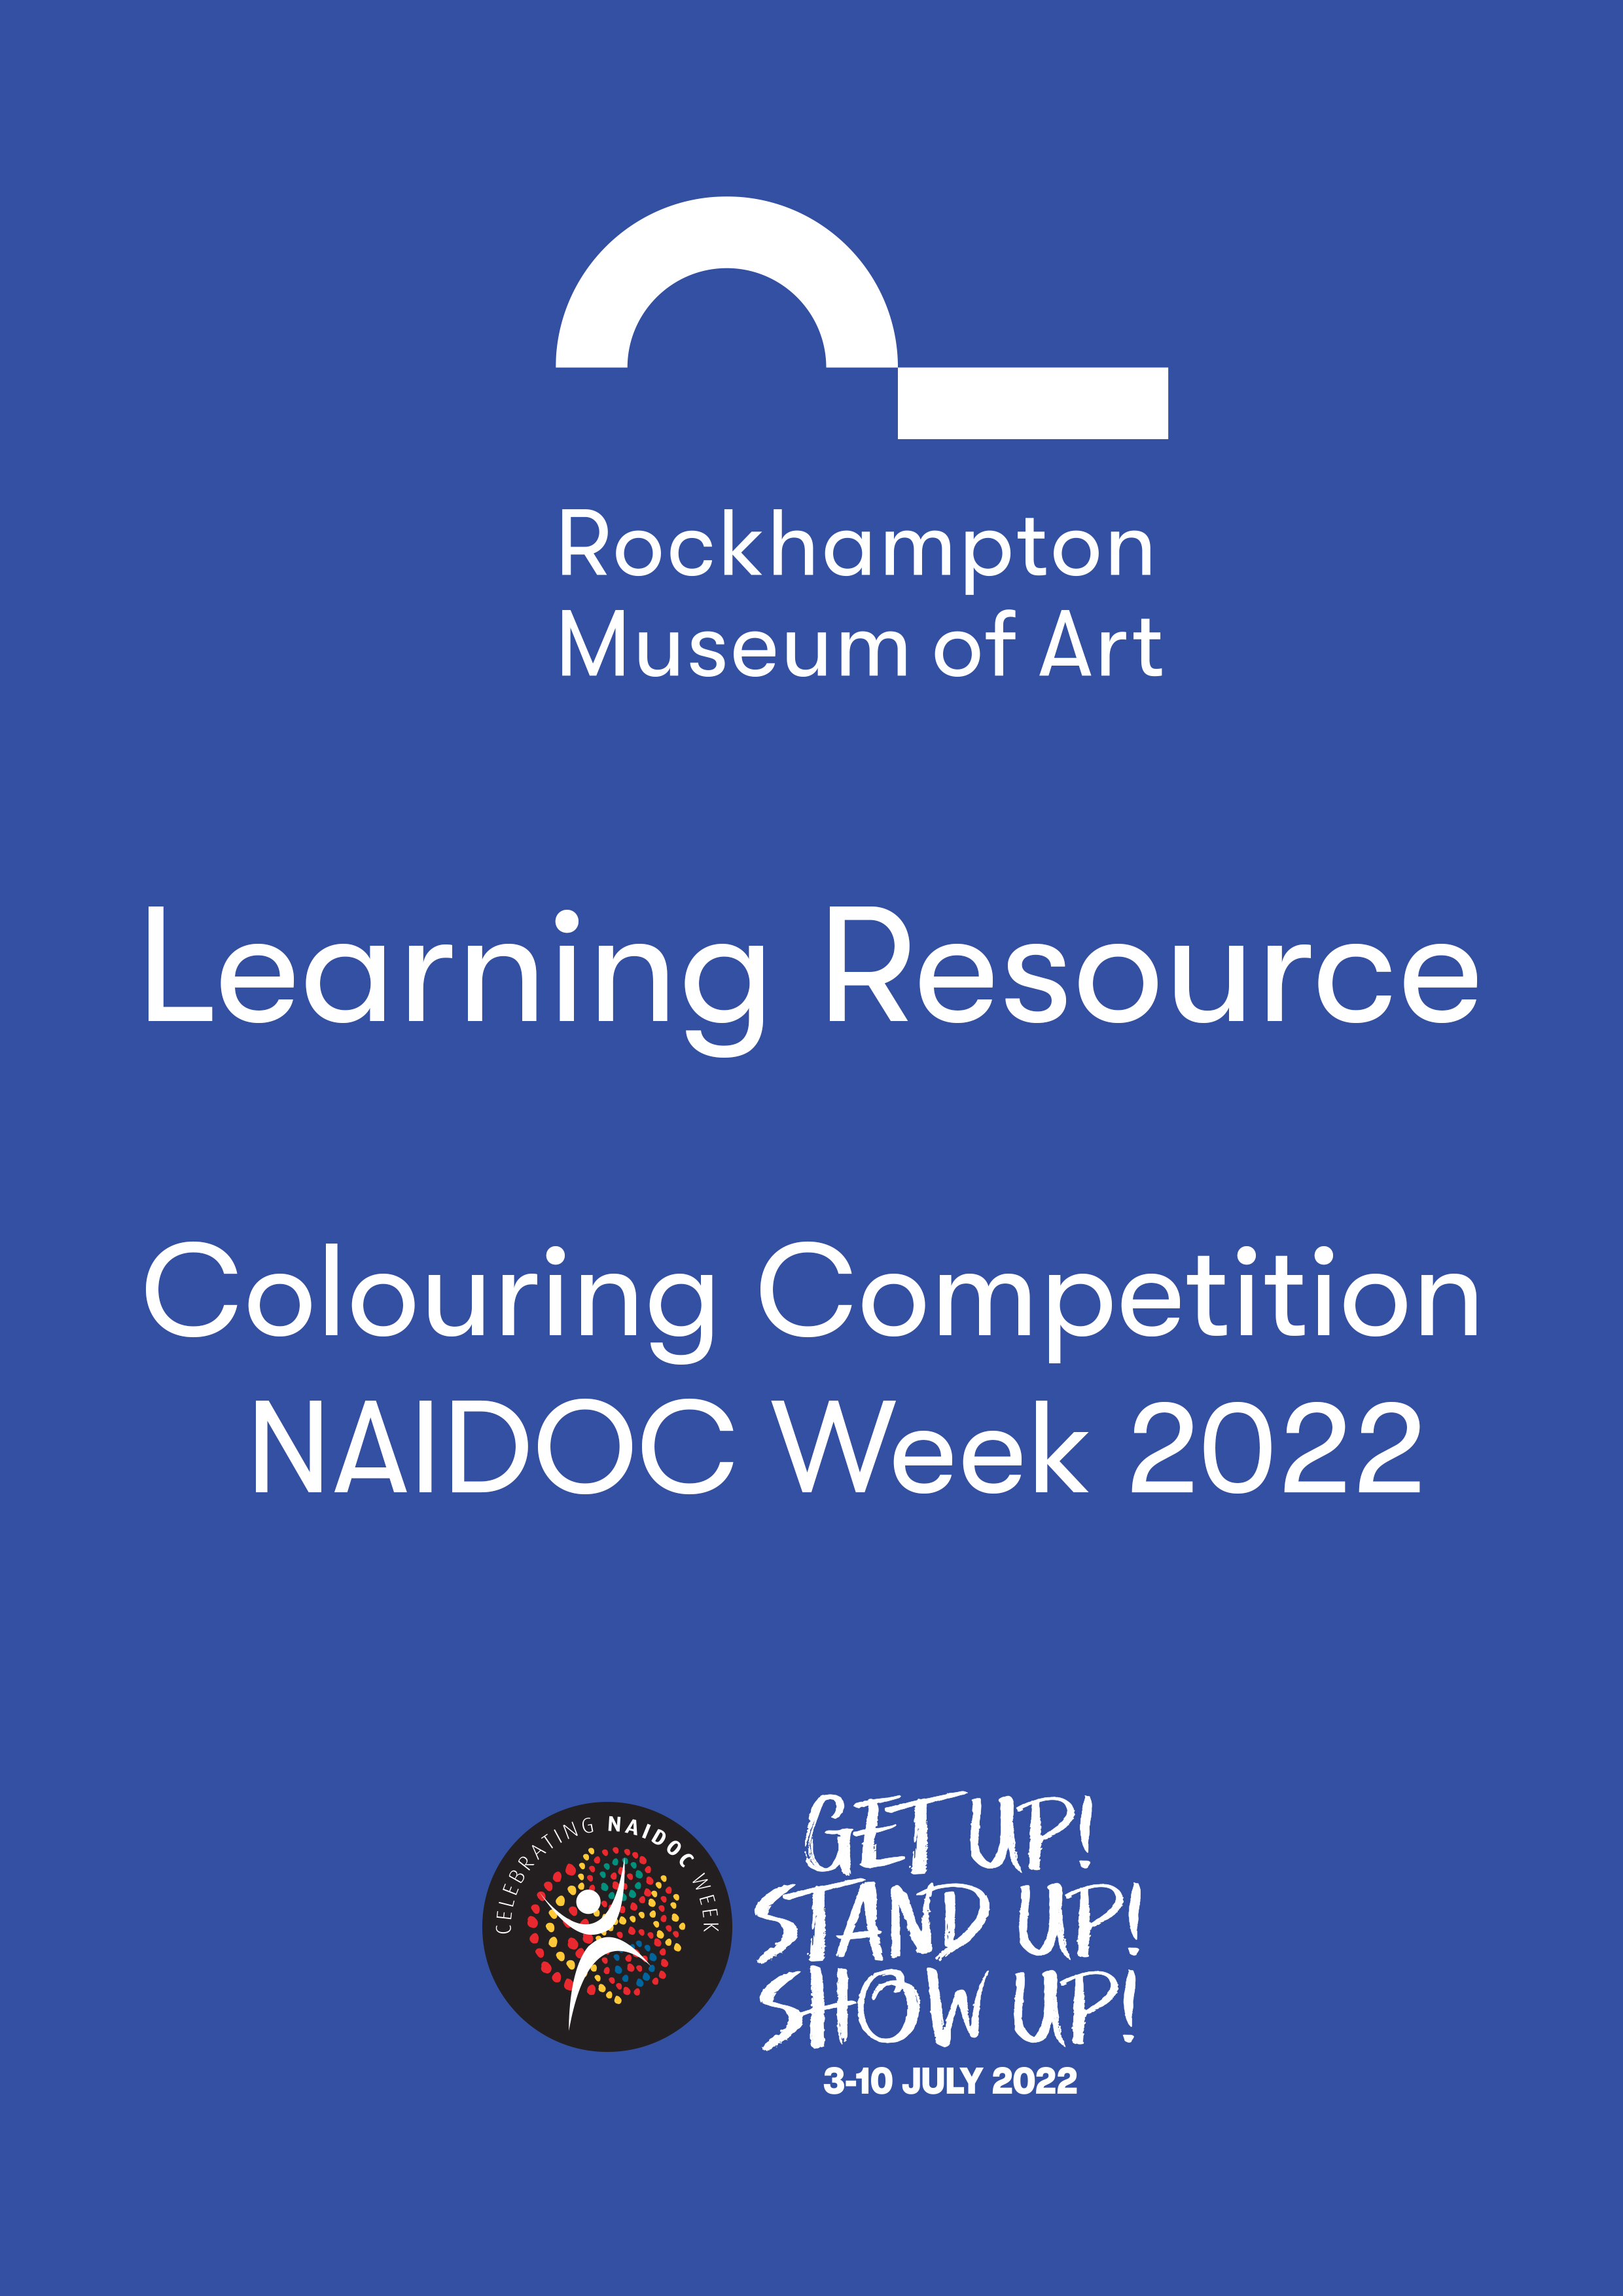 NAIDOC Colouring Competition & Learning Resource_RMOA_cover page copy.jpg